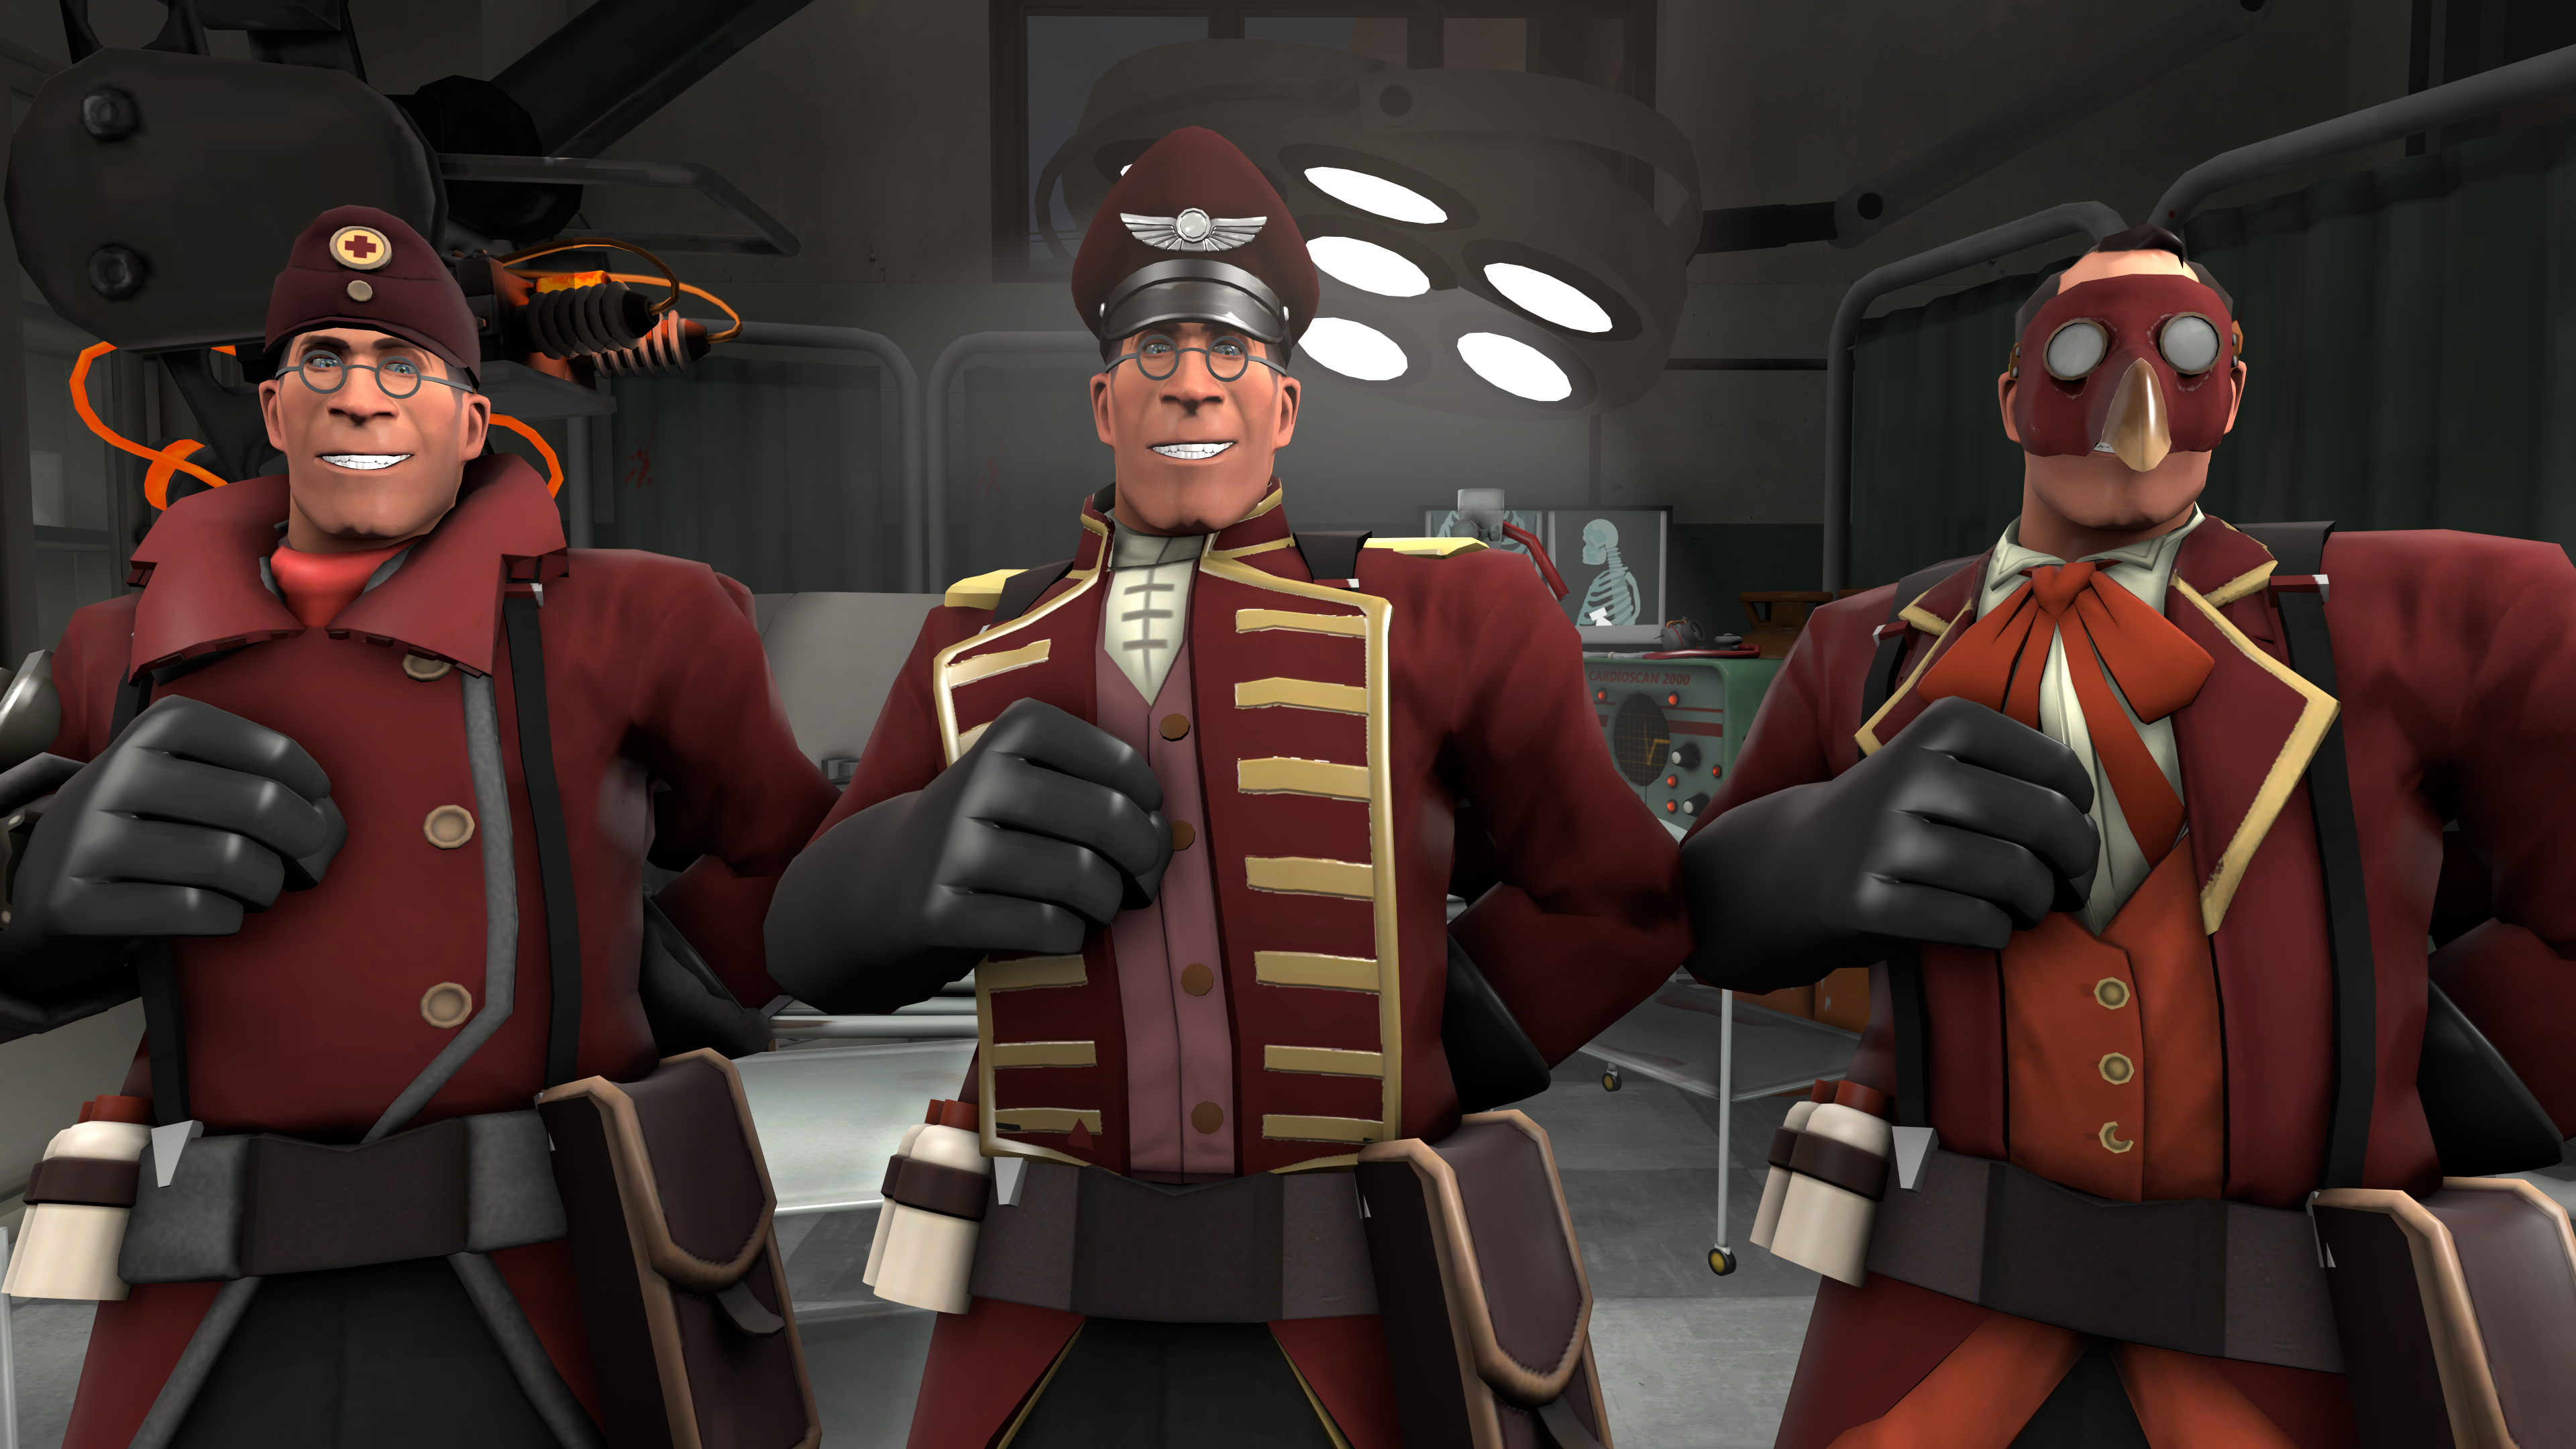 [SFM- TF2 skin] Medic burgundy red with hats